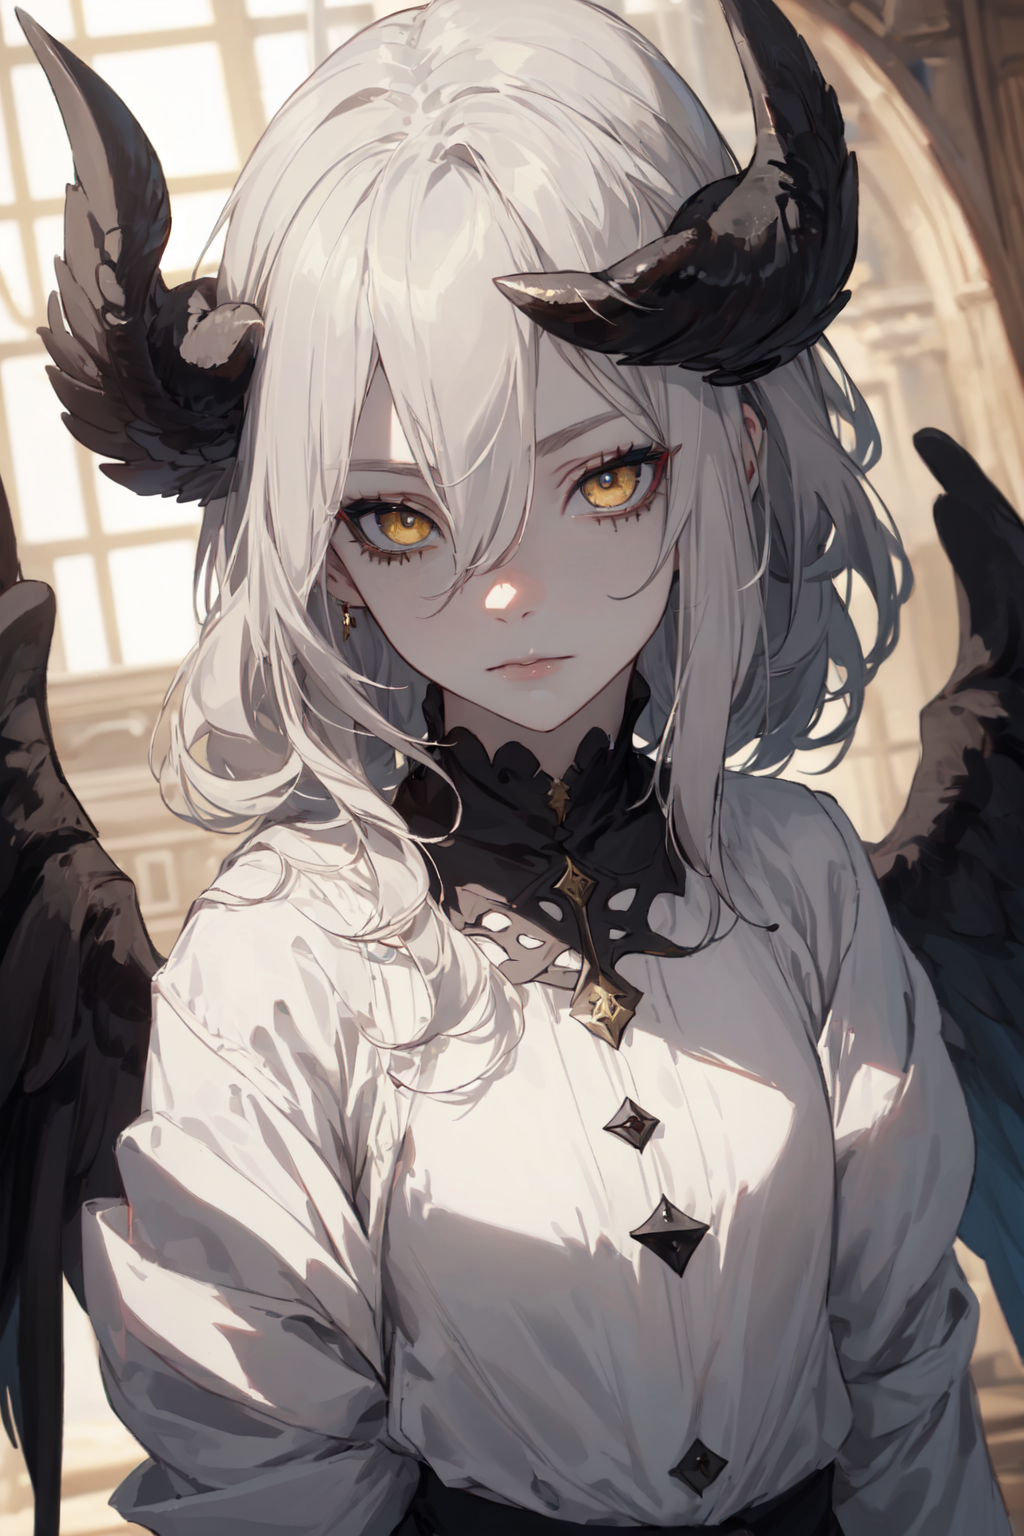 anime demon girl with wings and horns